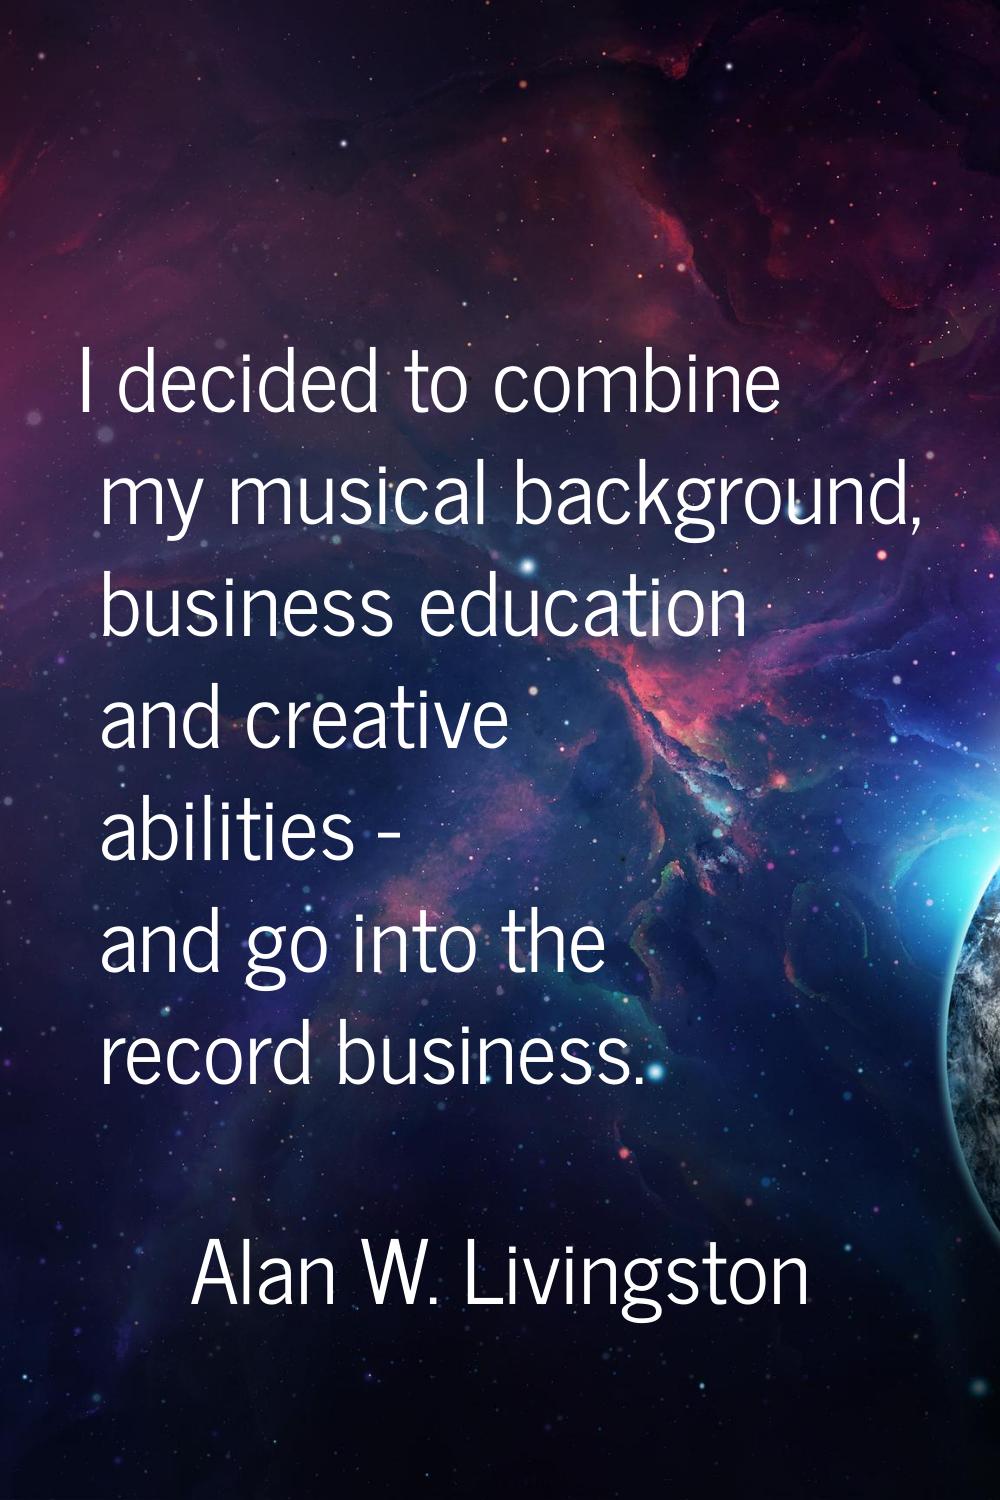 I decided to combine my musical background, business education and creative abilities - and go into